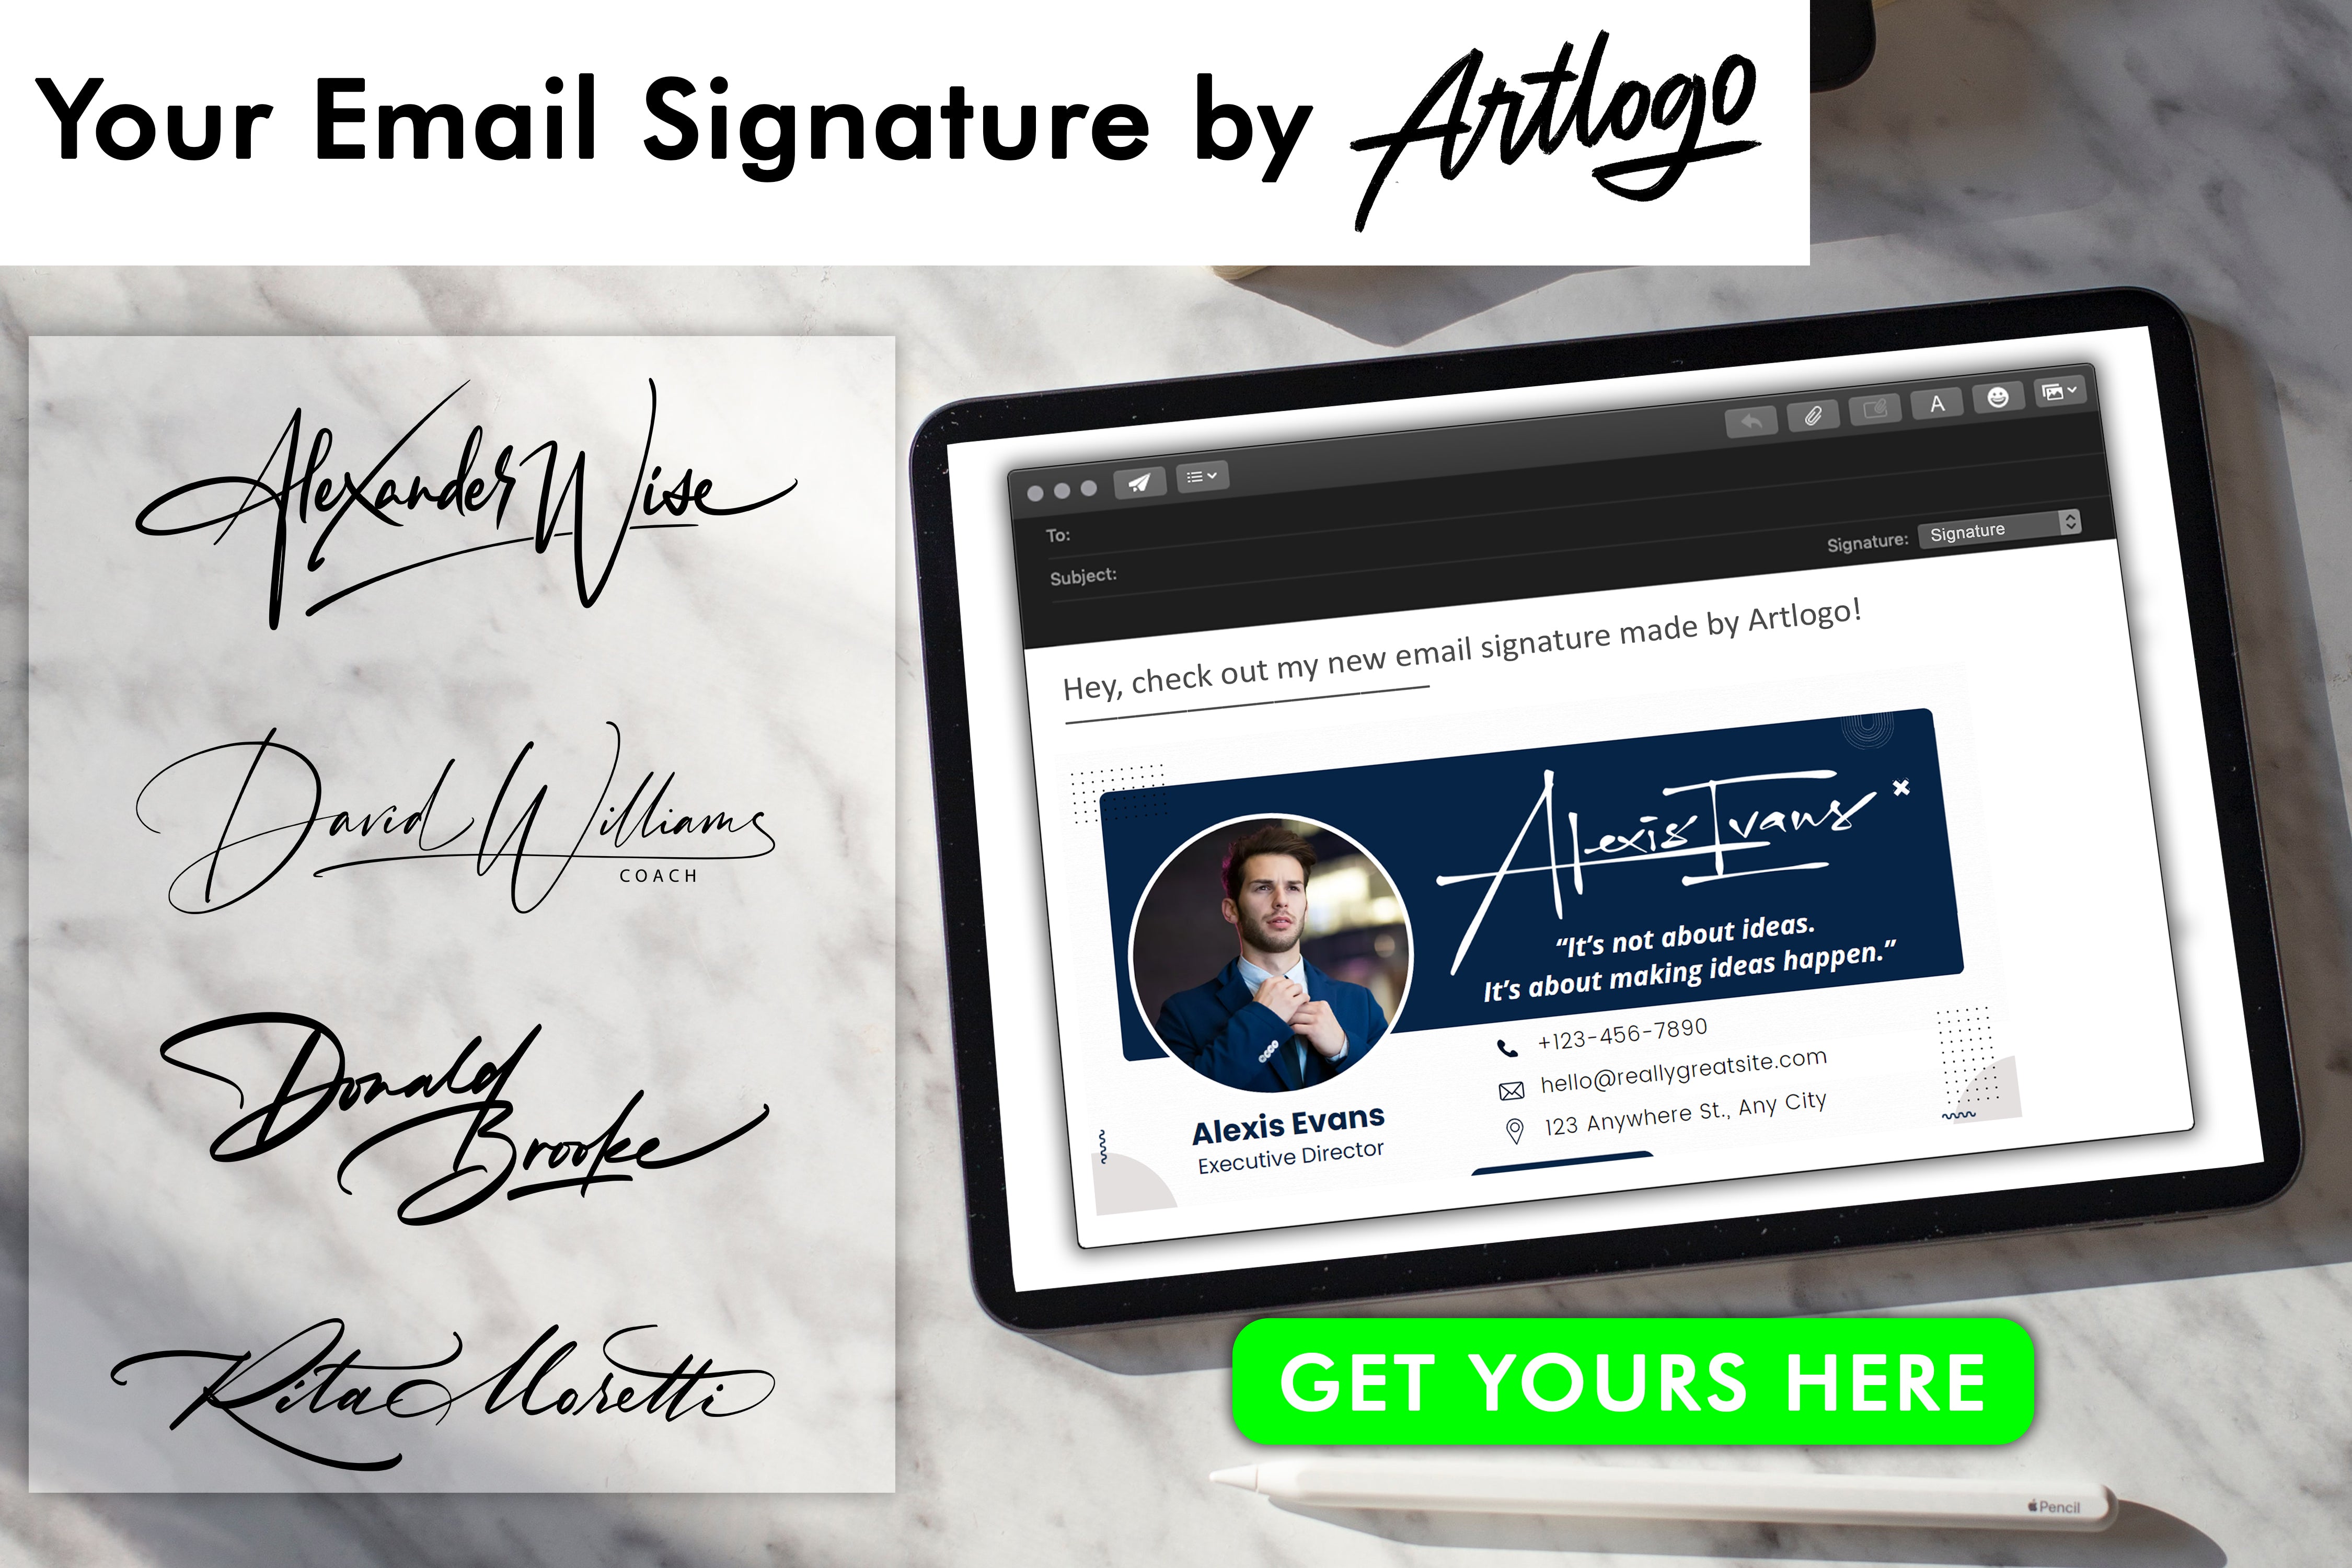 Easily elevate the impact of your emails by incorporating 10 inspiring signature quotes. Make a lasting impression effortlessly, click here to read.